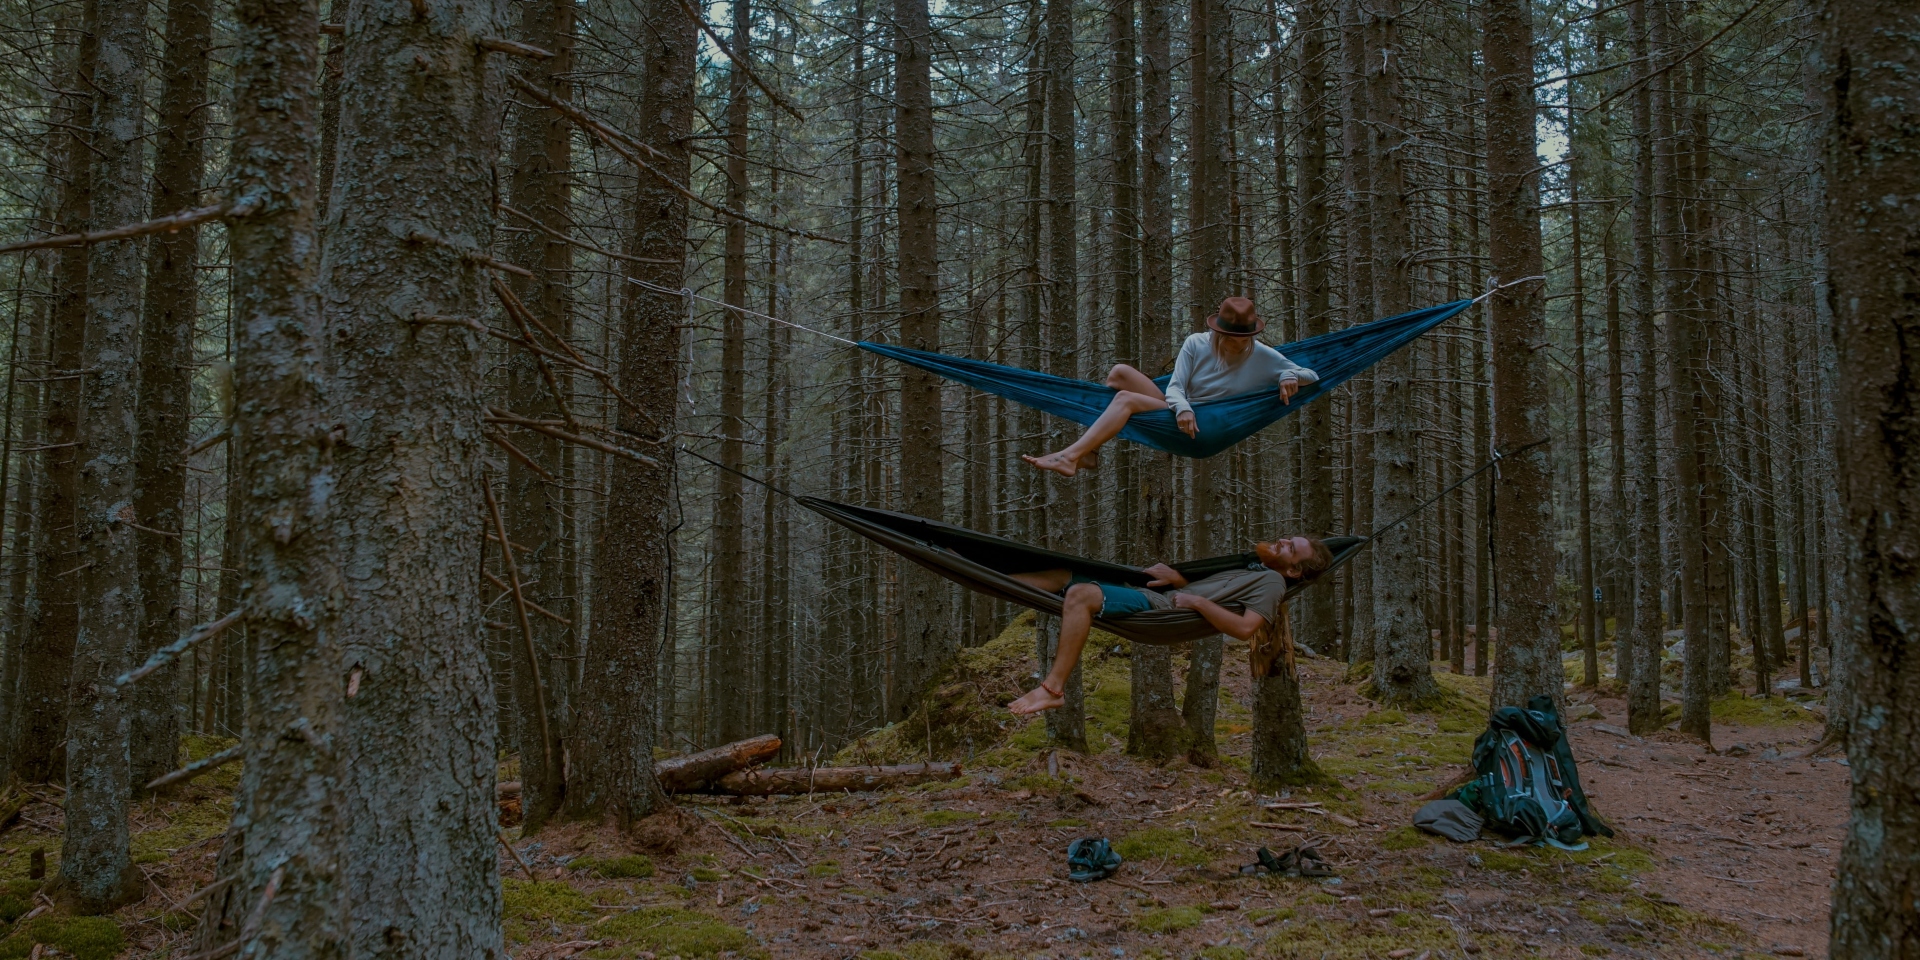 A man and a woman in two vertically stacked hammocks in the forest who know how to relax in nature